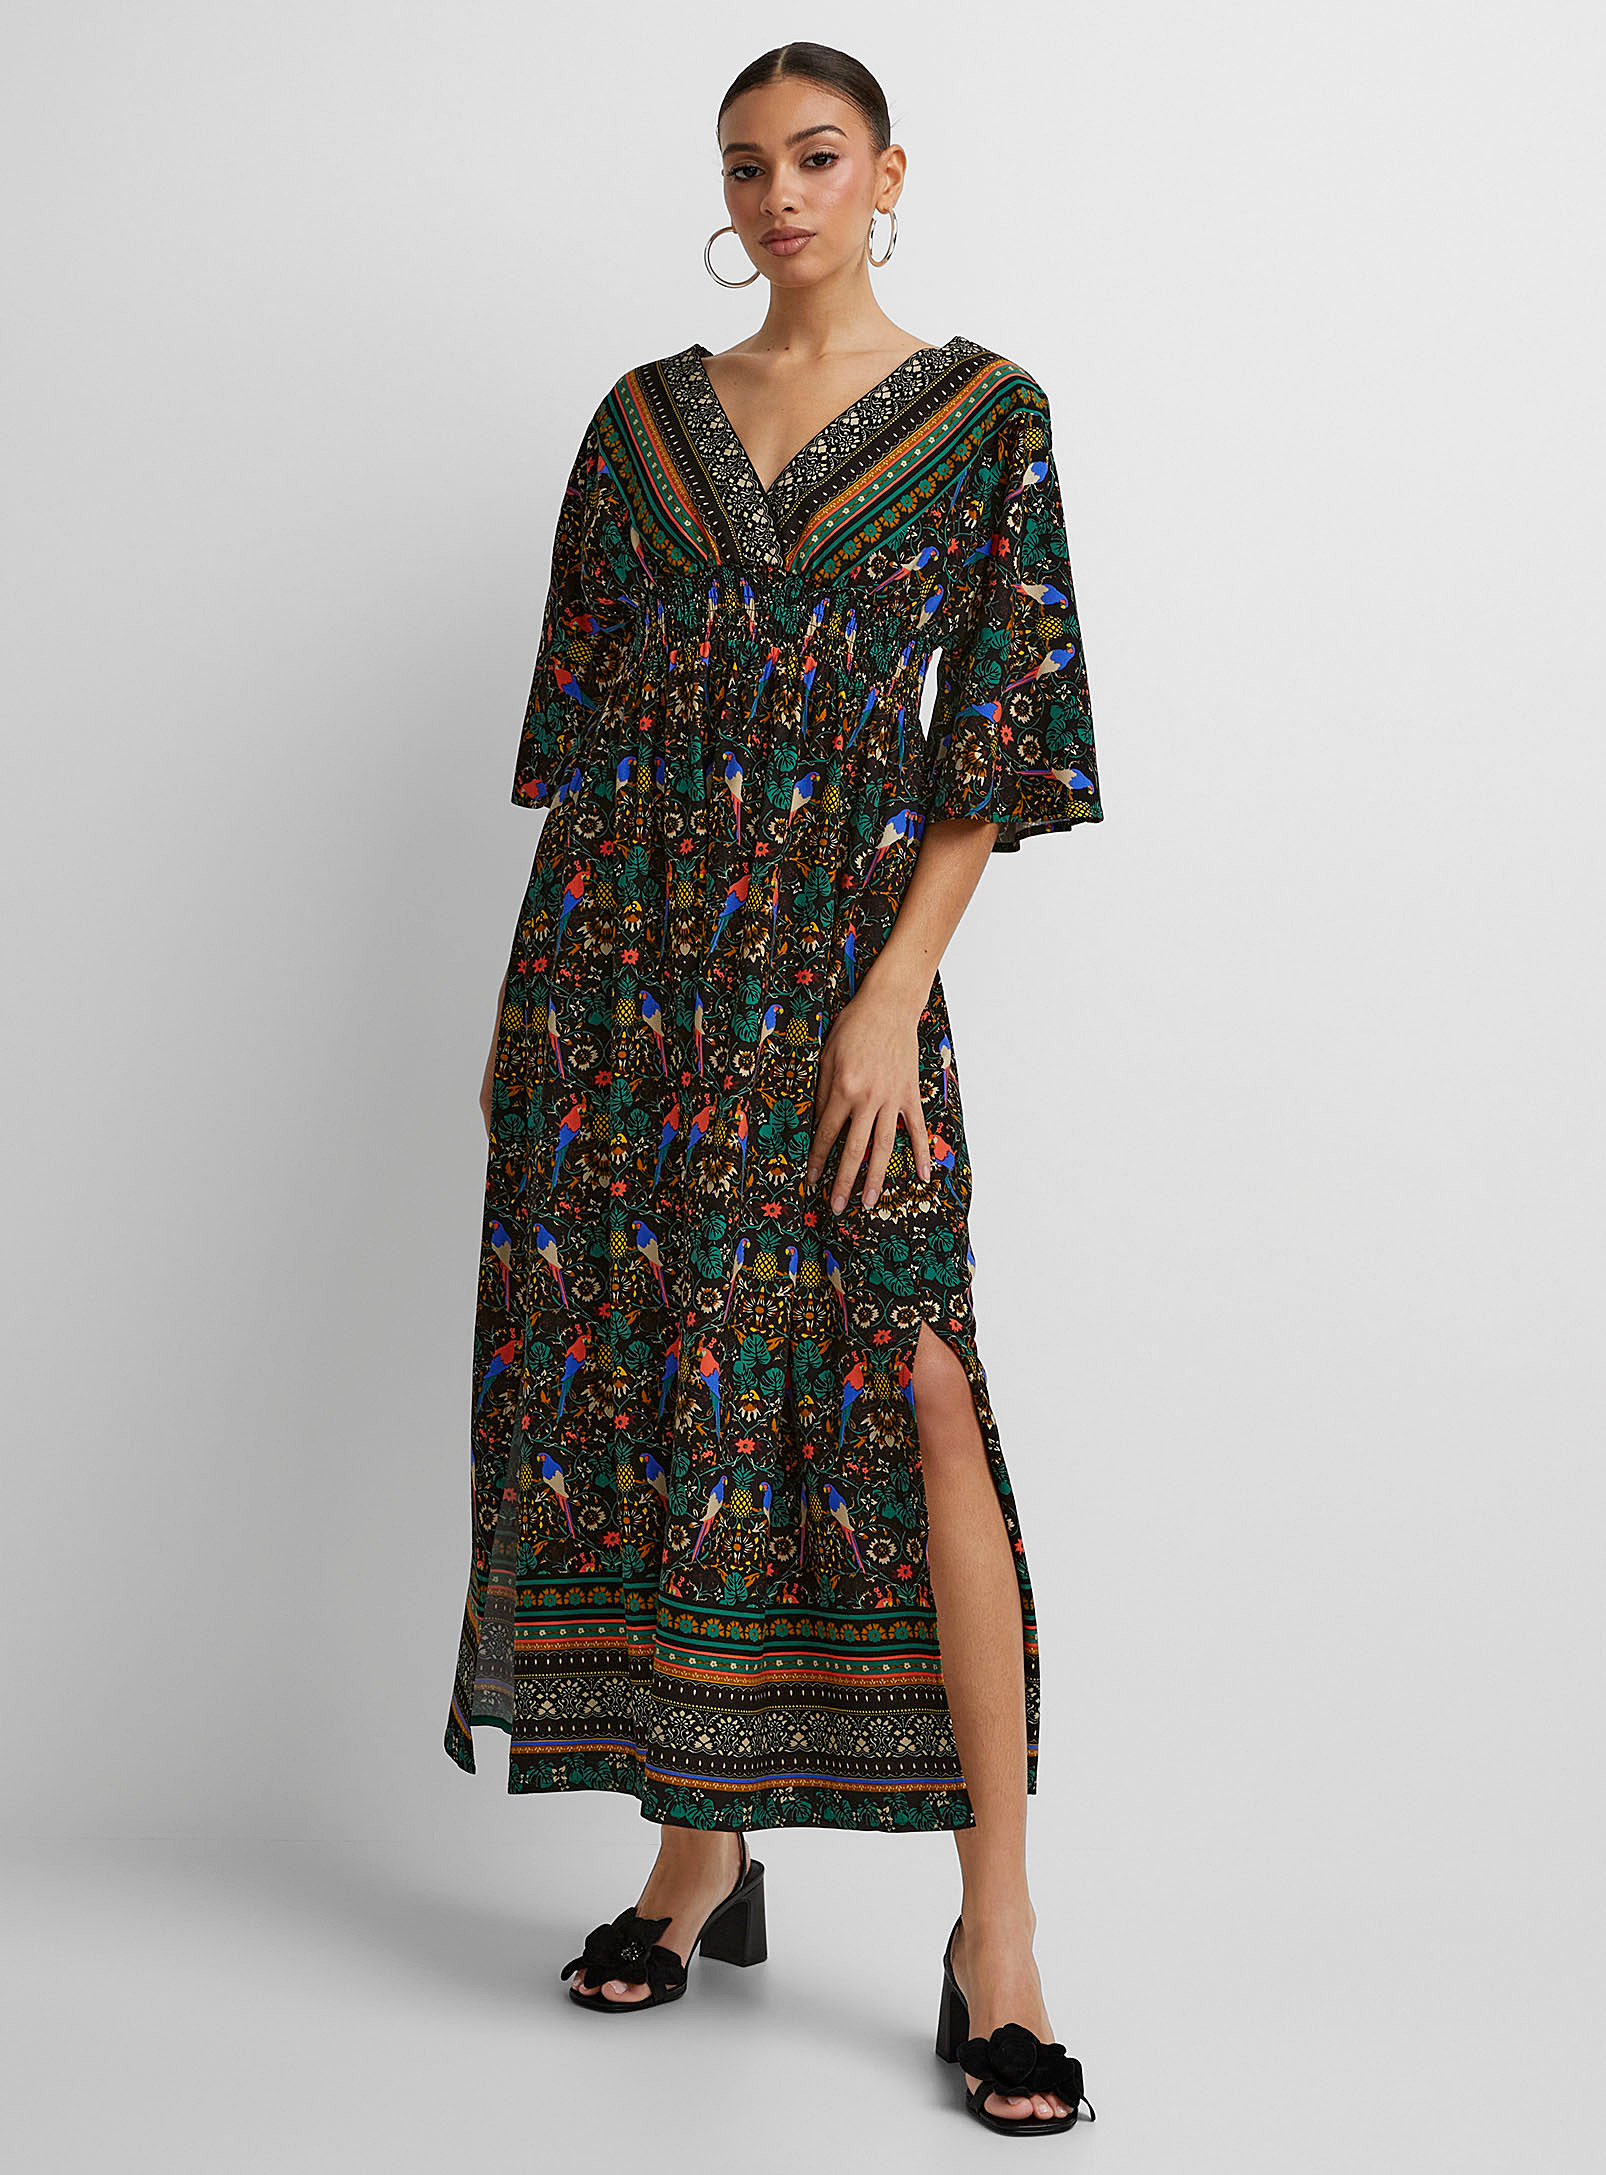 Icone Plunging V-neck Printed Long Dress In Patterned Black